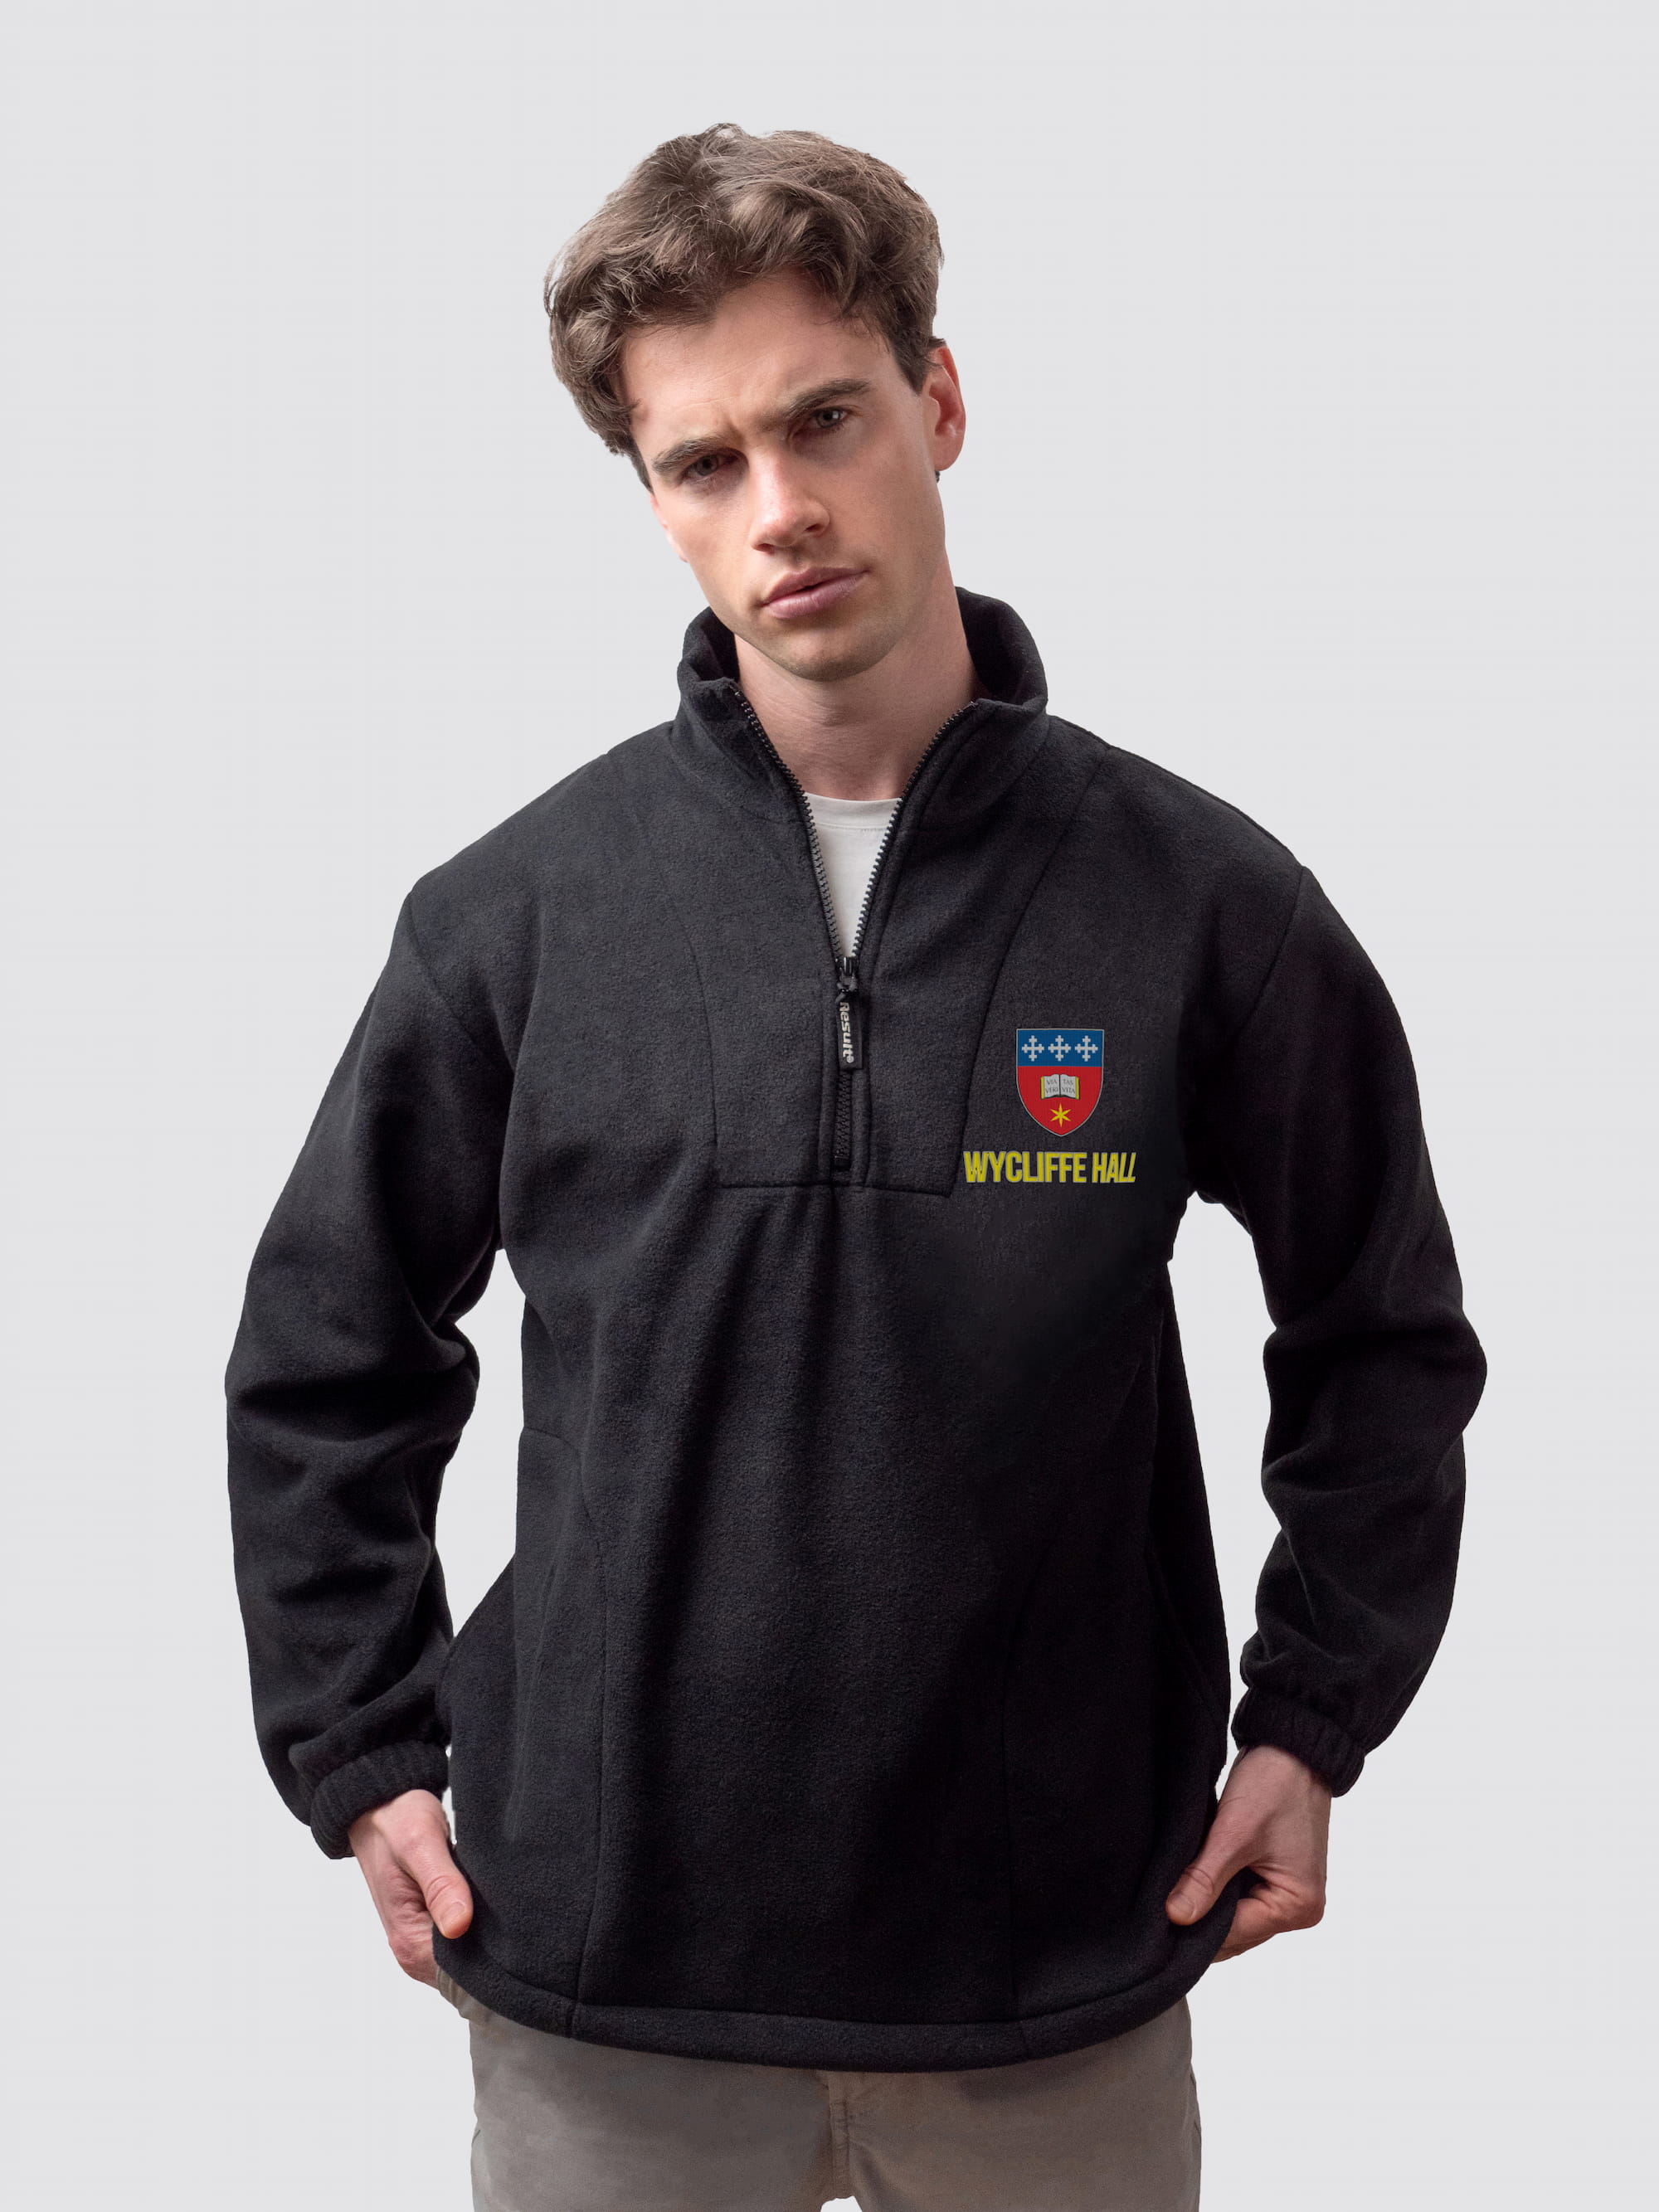 Oxford university fleece, with custom embroidered initials and Wycliffe Hall crest